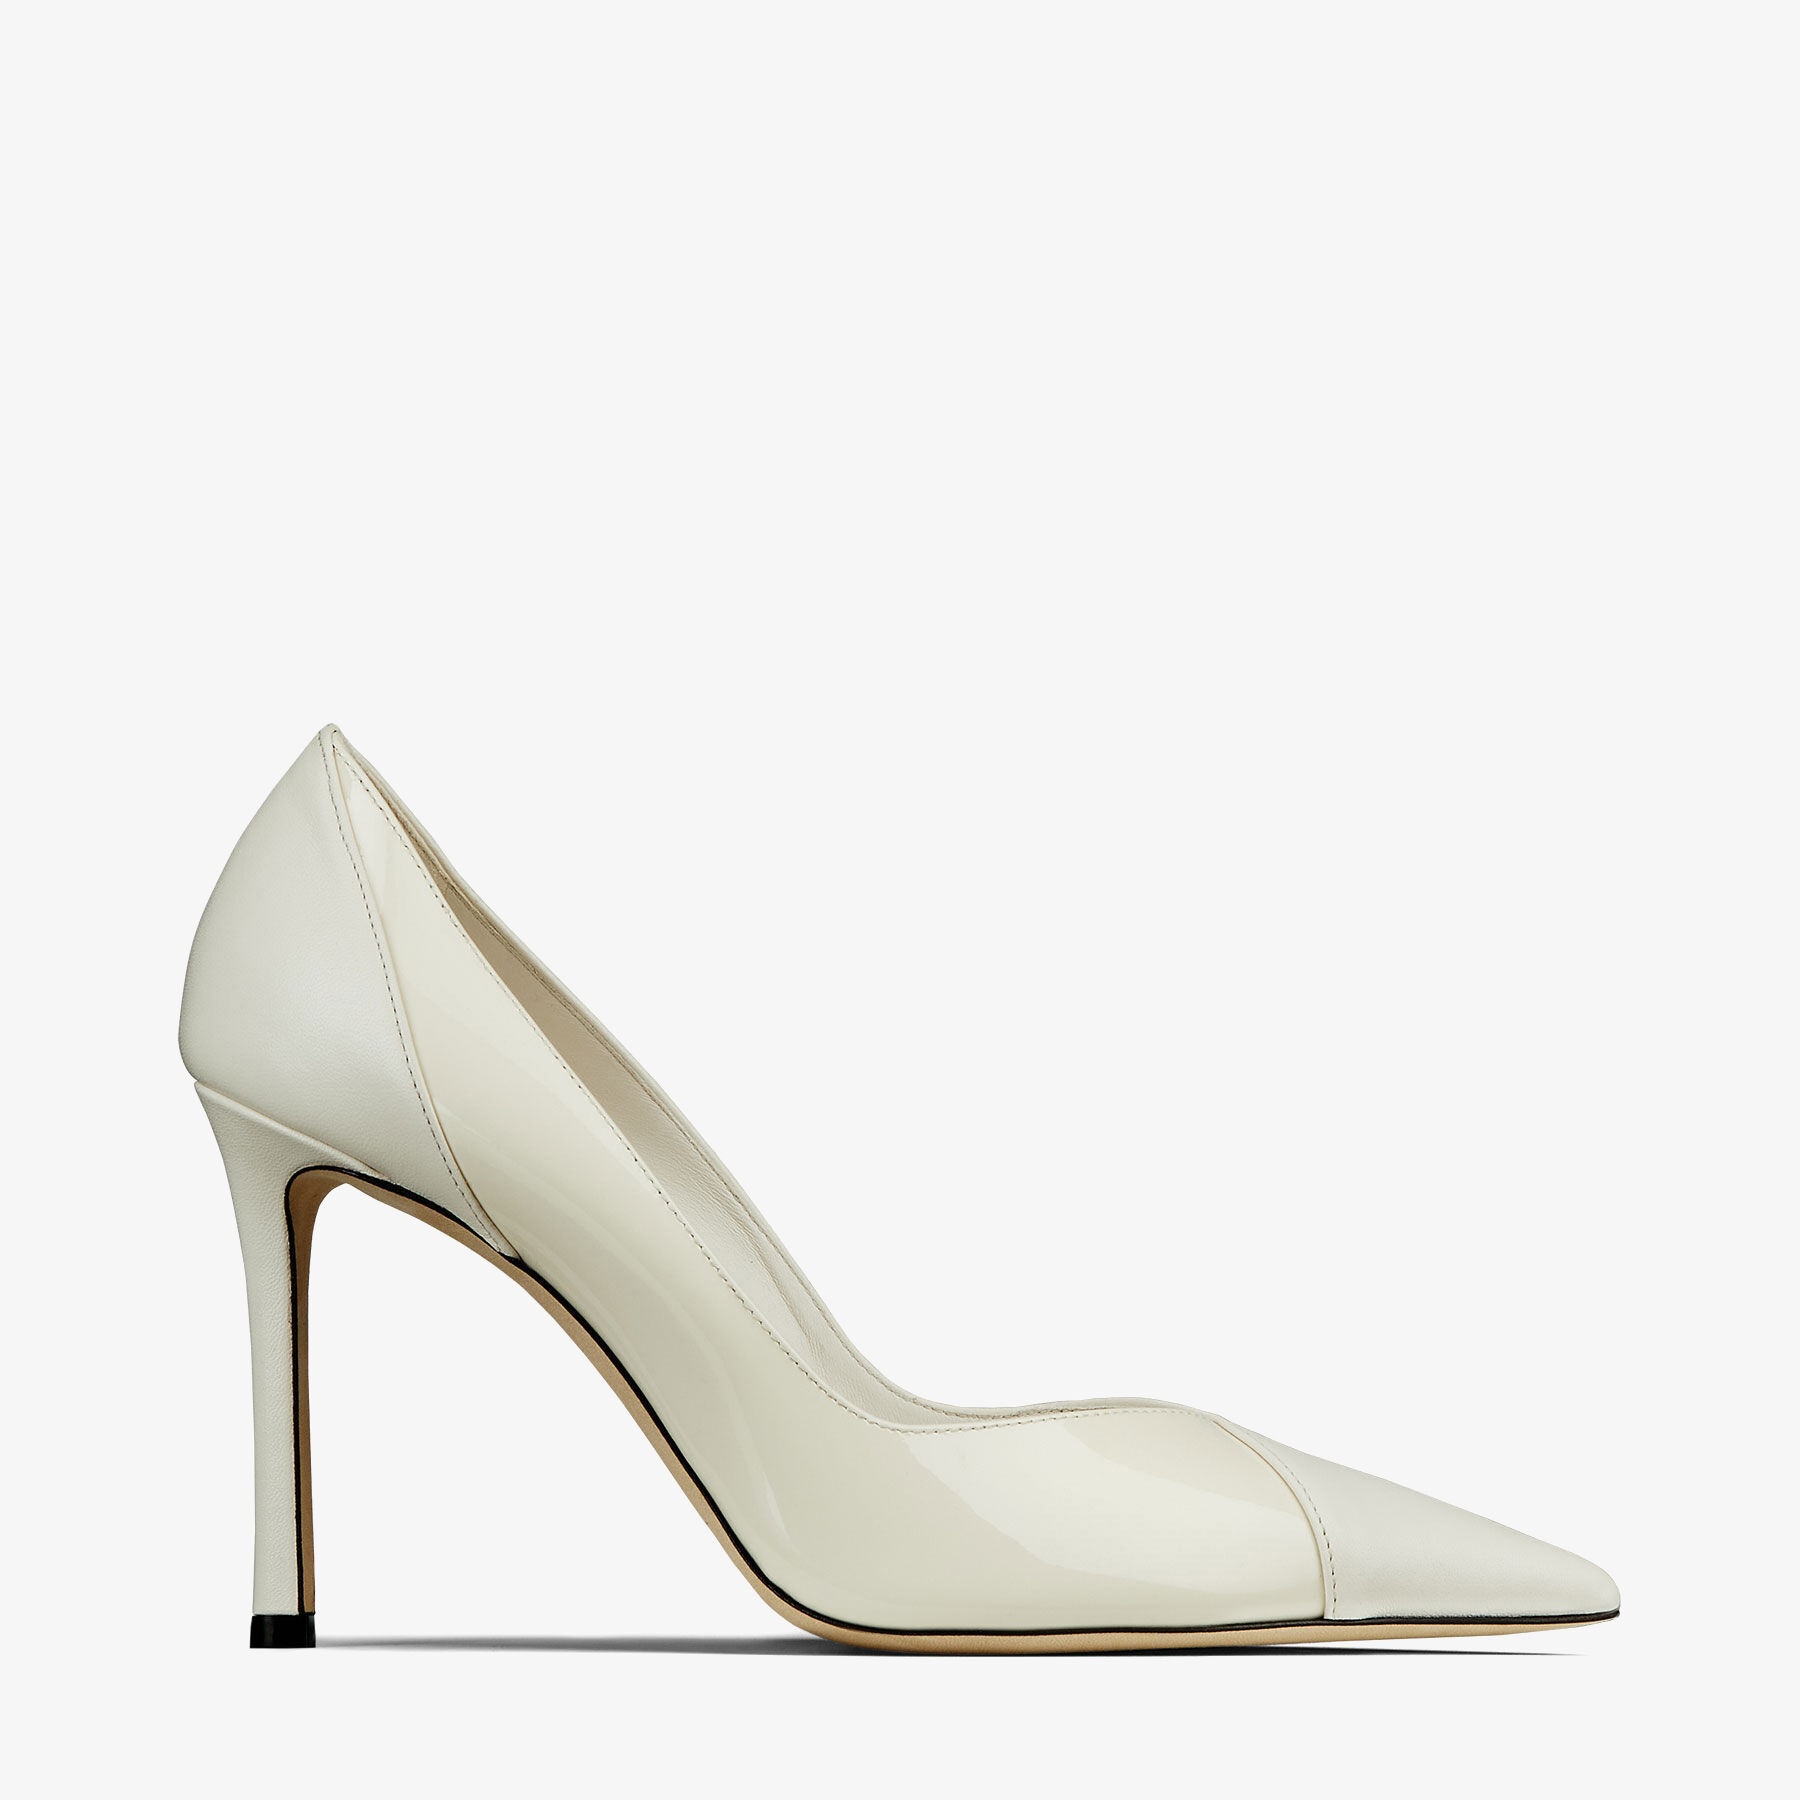 Cass 95
Latte Nappa and Patent Leather Pumps - 1